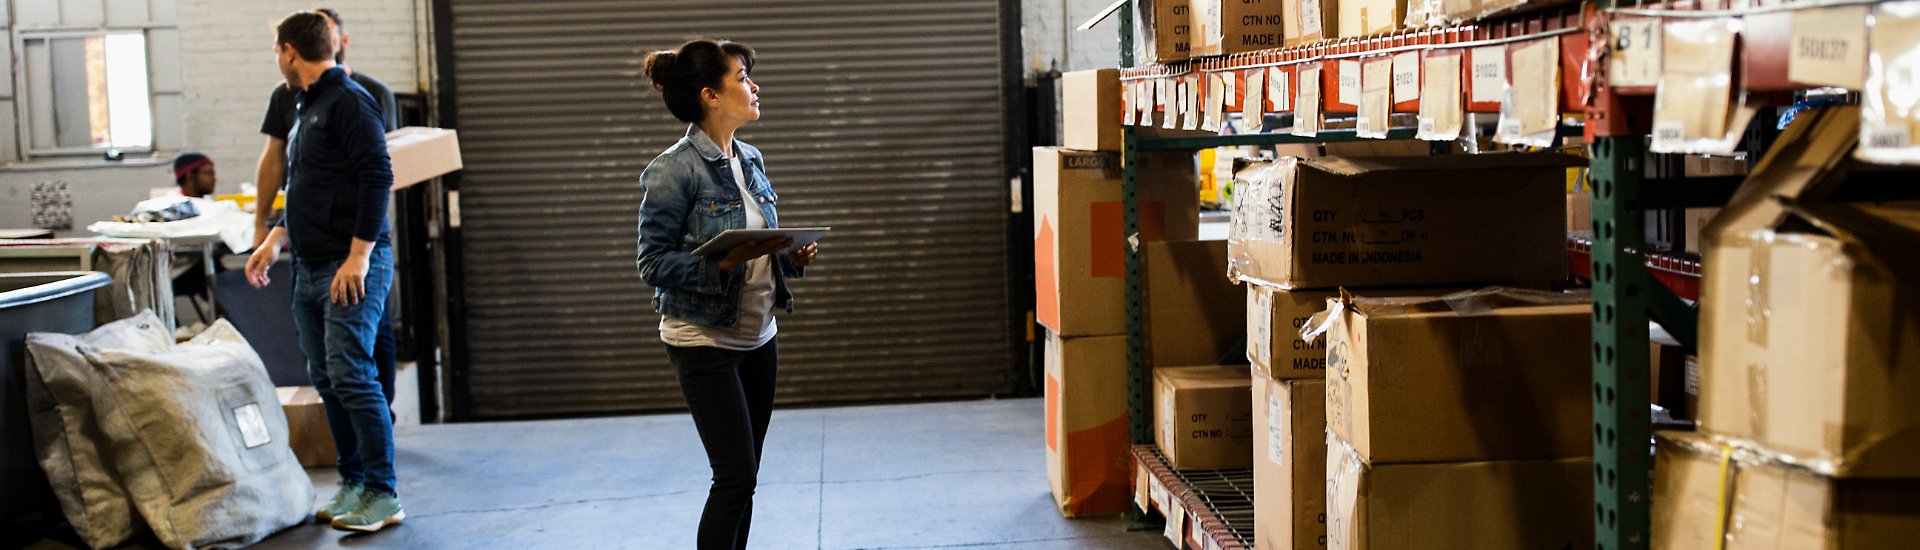 A person holding a tablet device, looking at boxes on a large shelf in a warehouse.